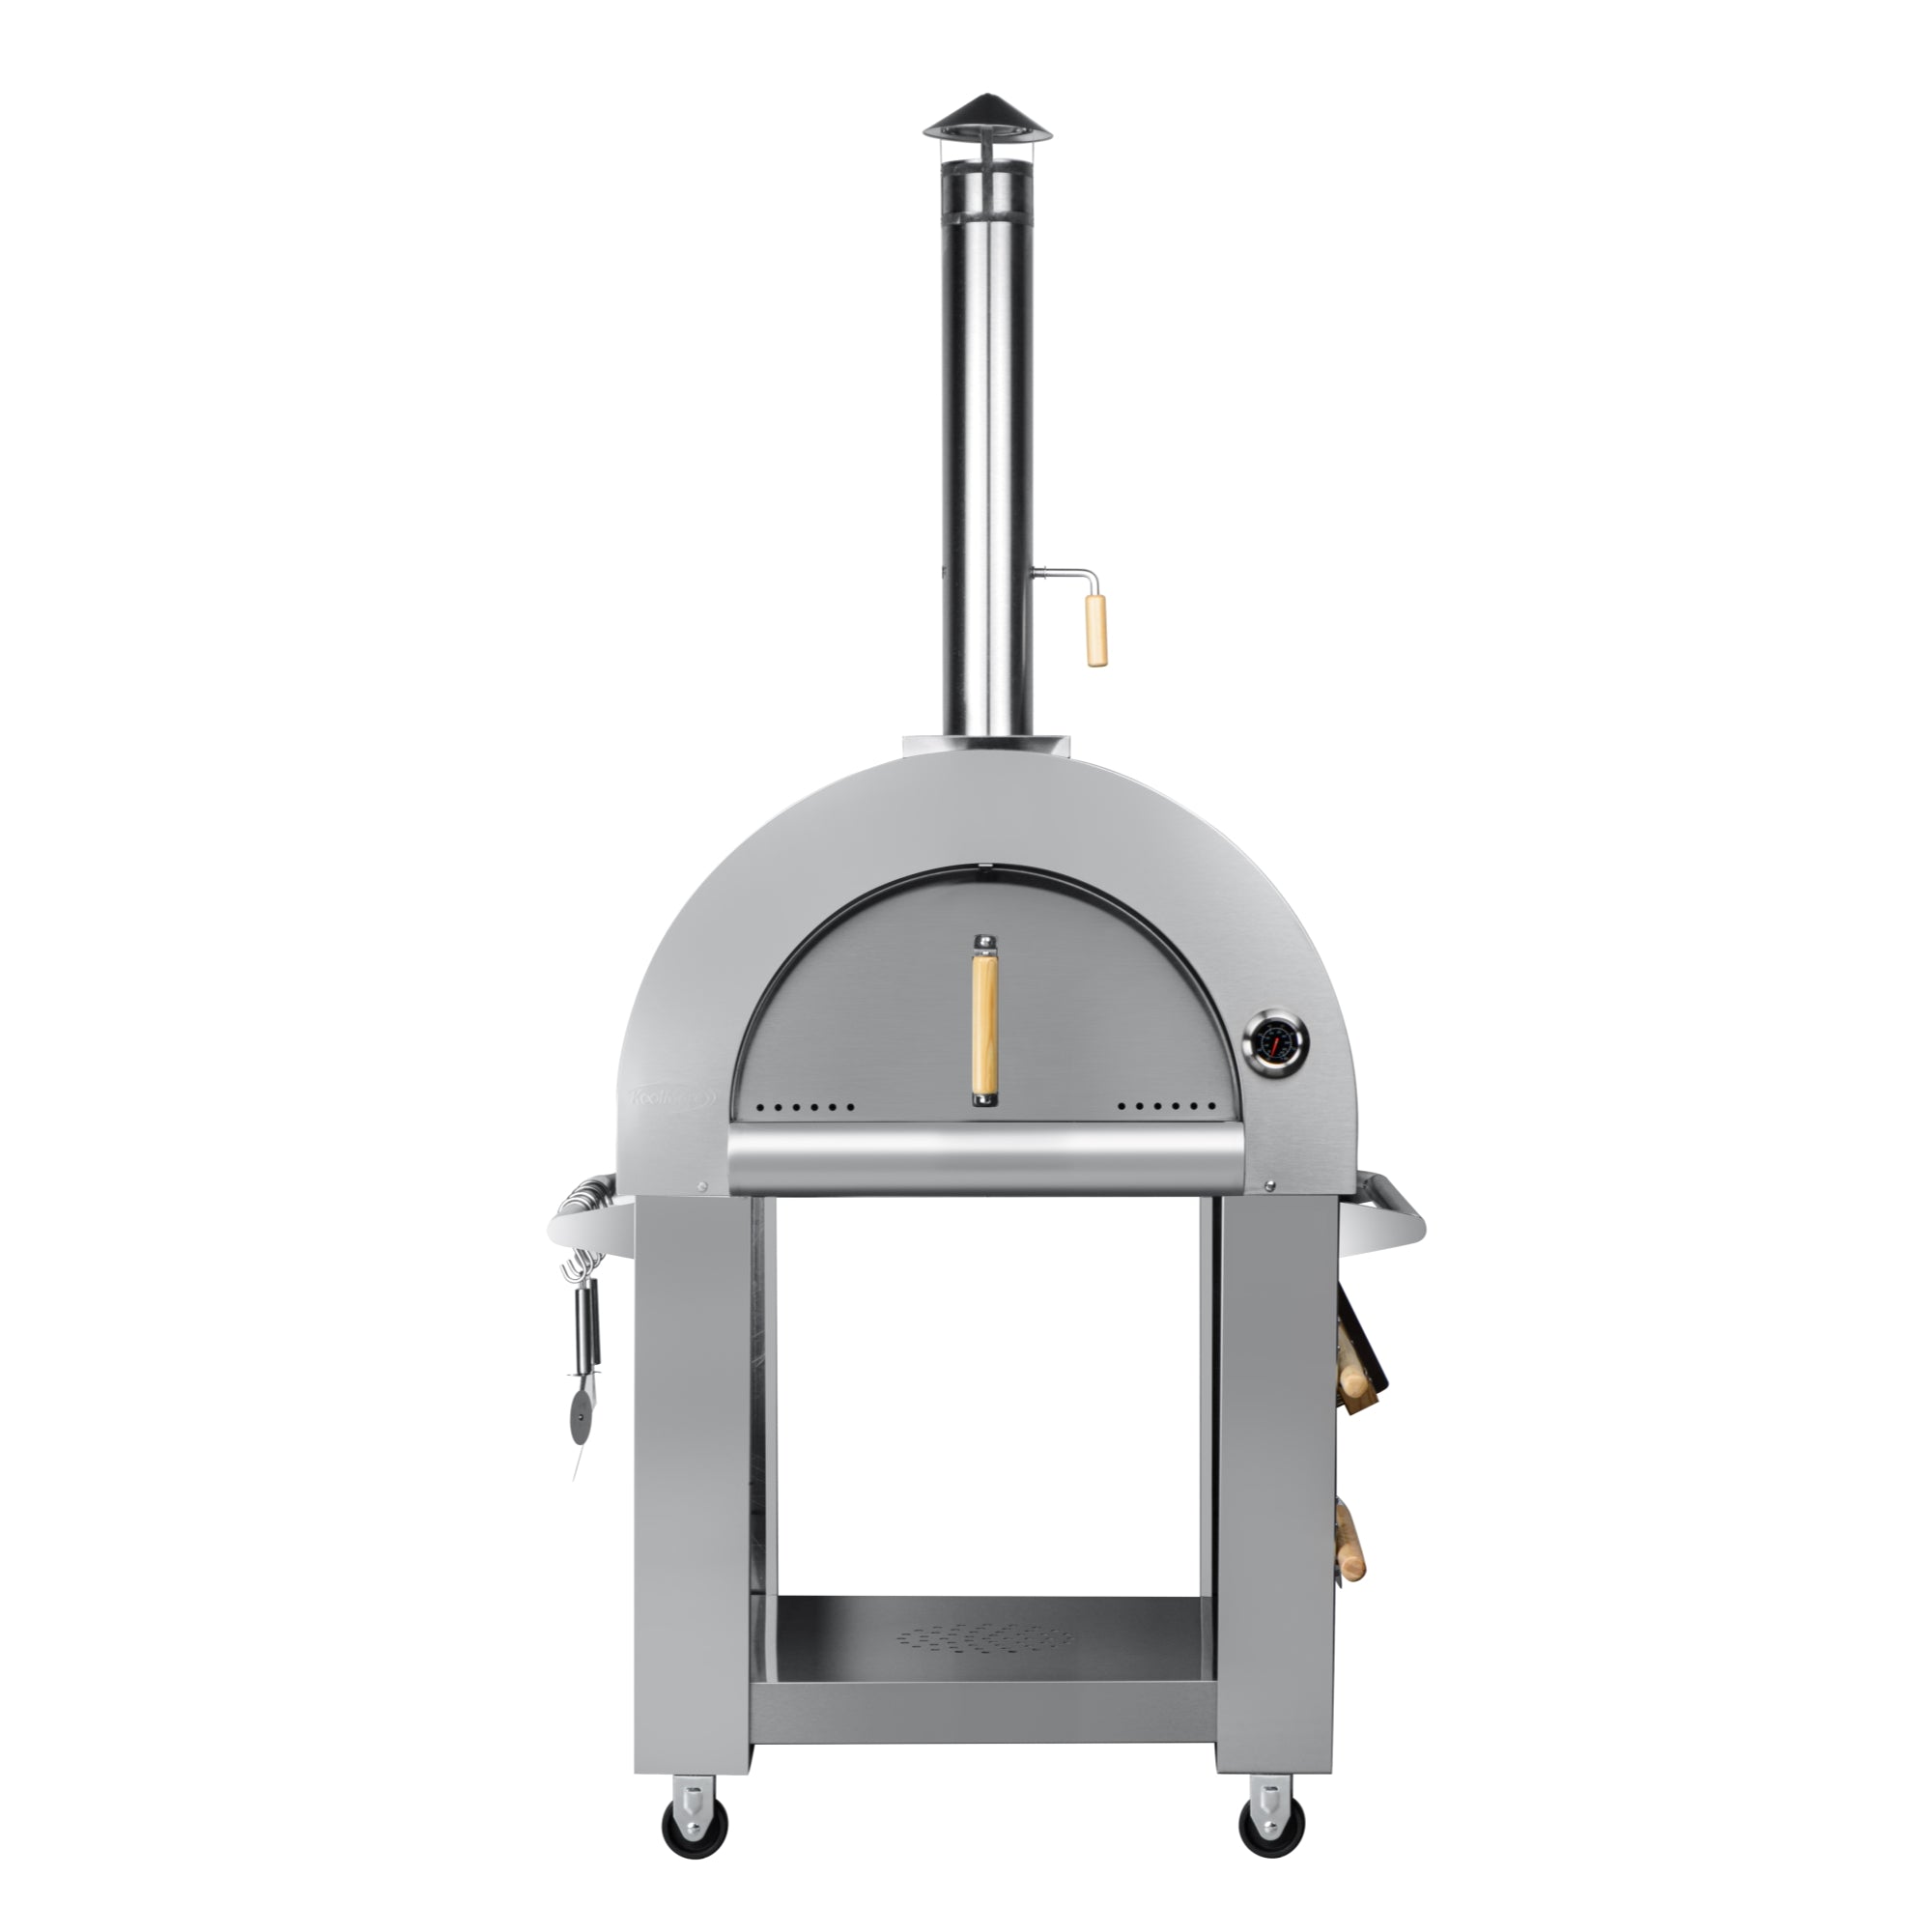 Koolmore 32 in. Wood Fired Outdoor Pizza Oven in Stainless-Steel